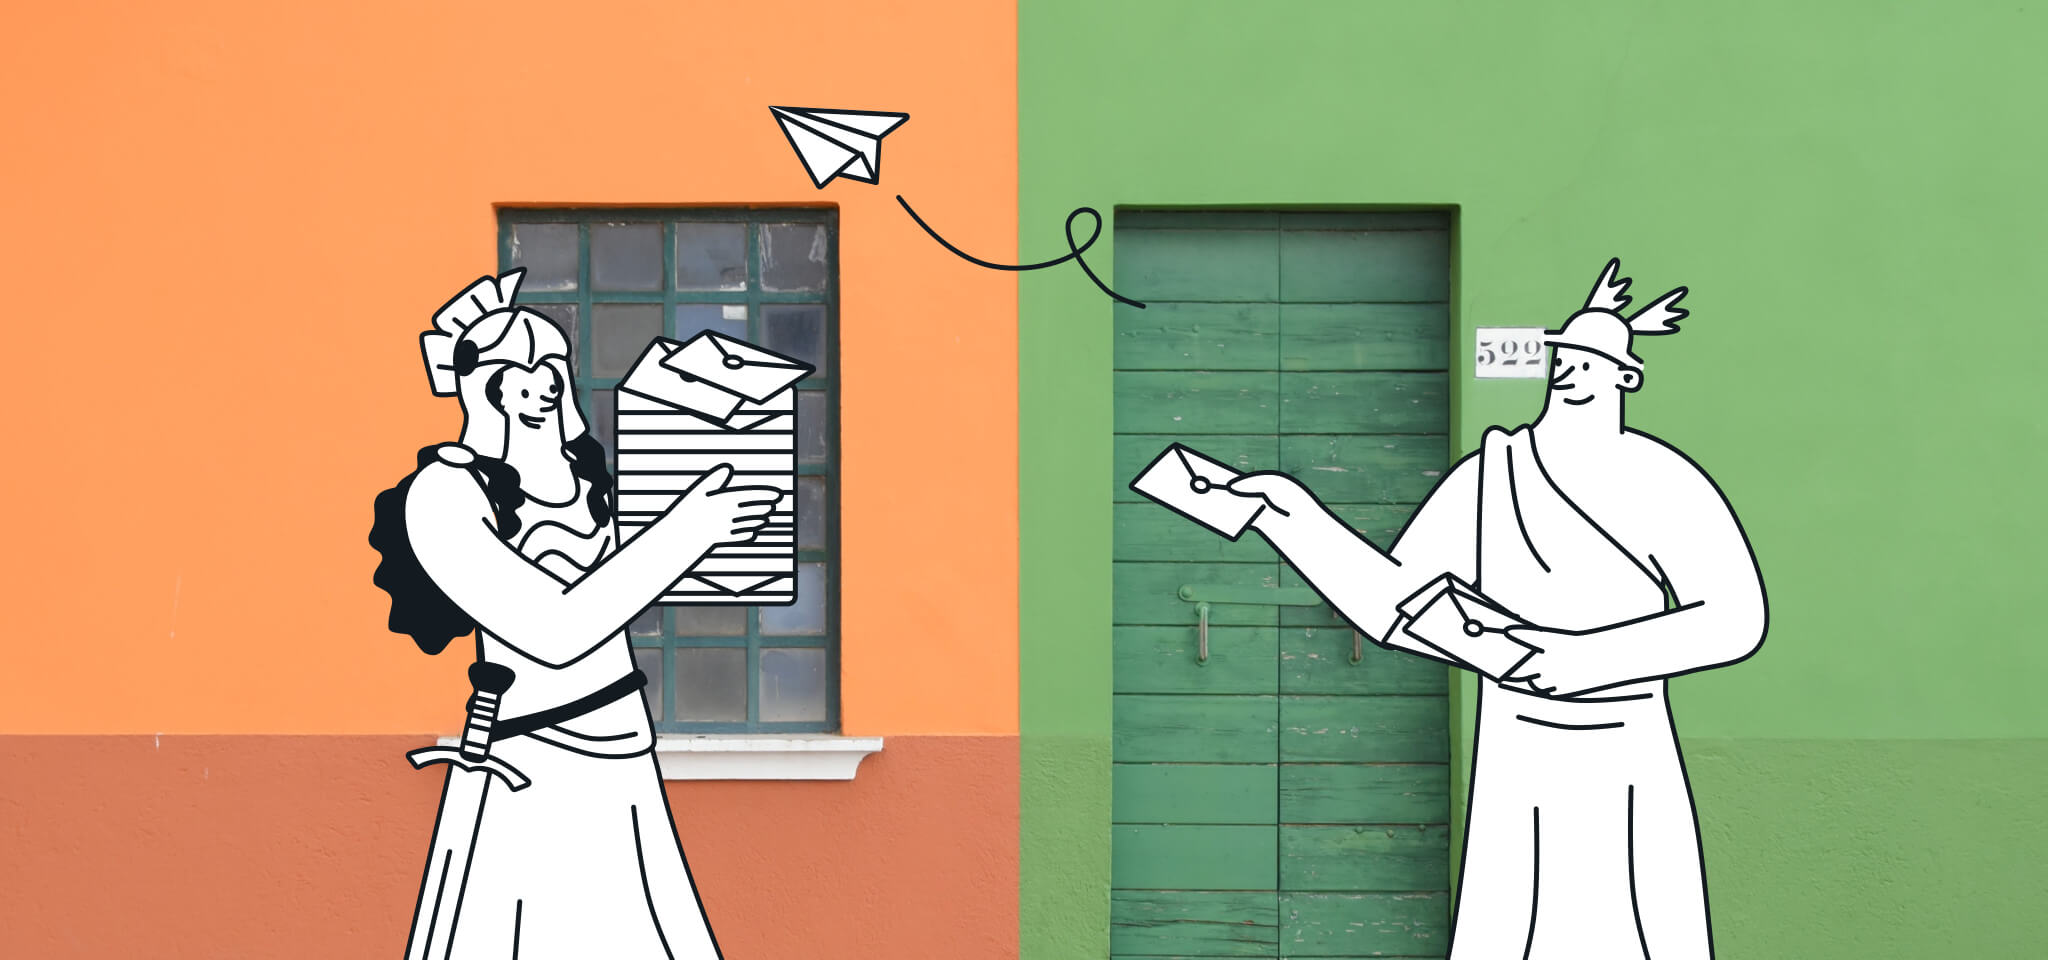 Hermes and a Goddess deliver mail in front of a green and orange house